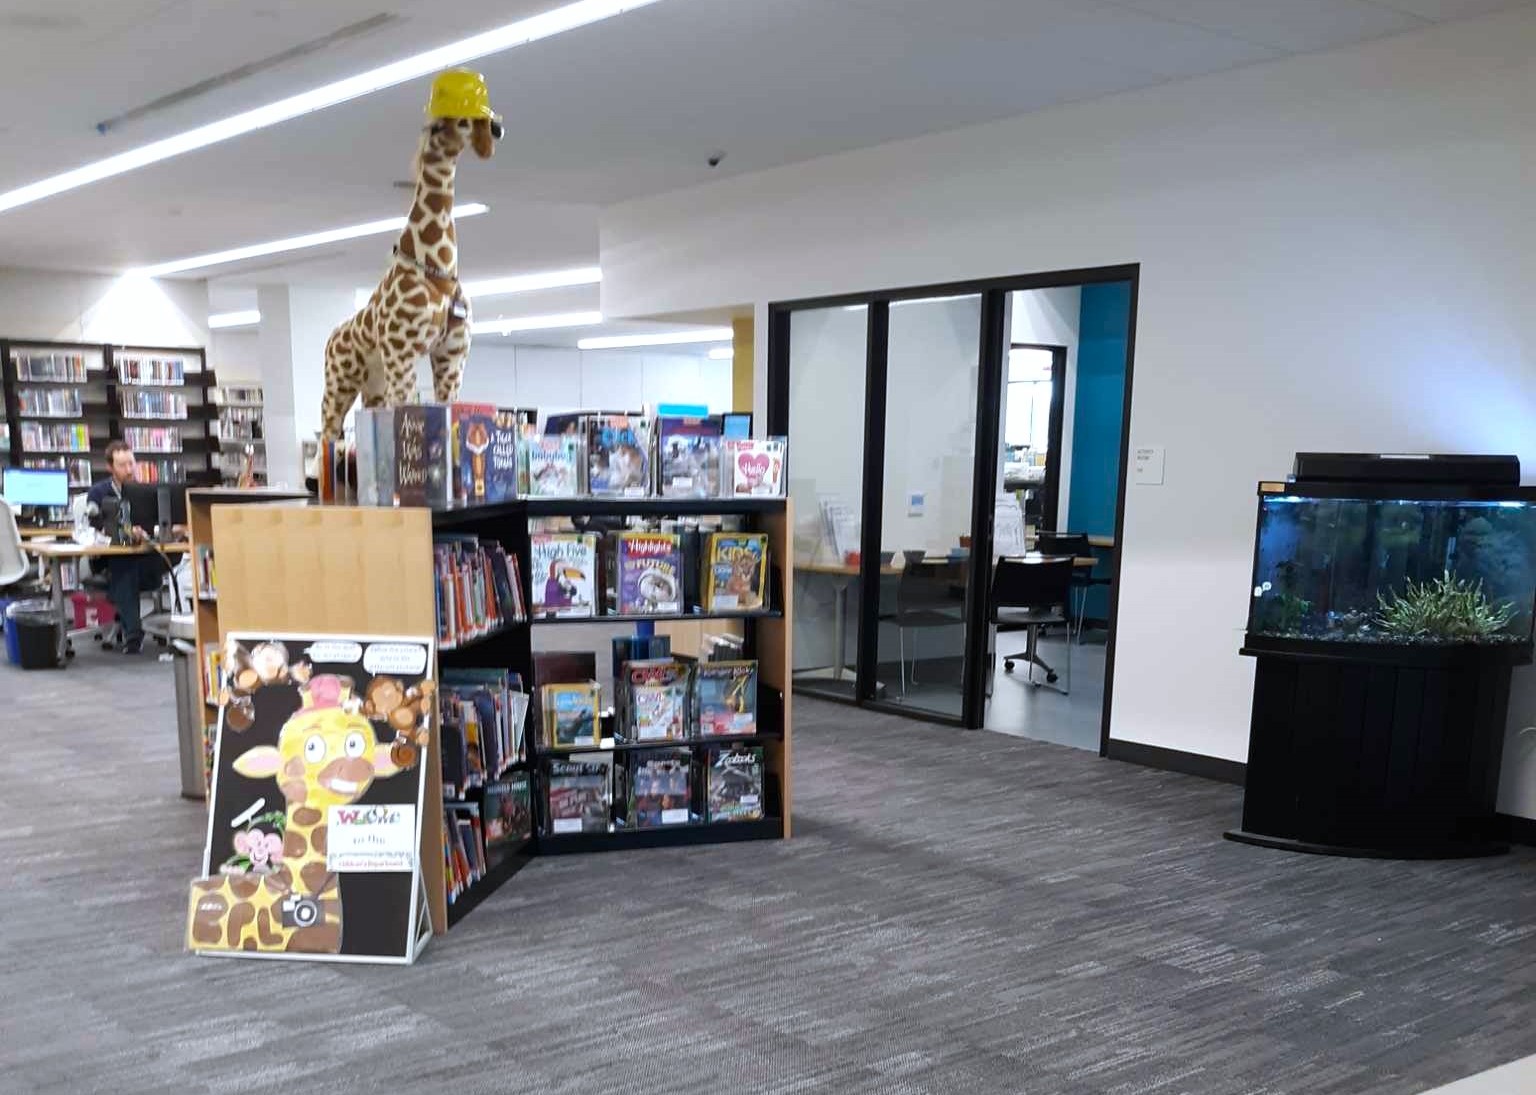 Entrance to the childrens department with a book display, stuffed giraffe and giraffe artwork